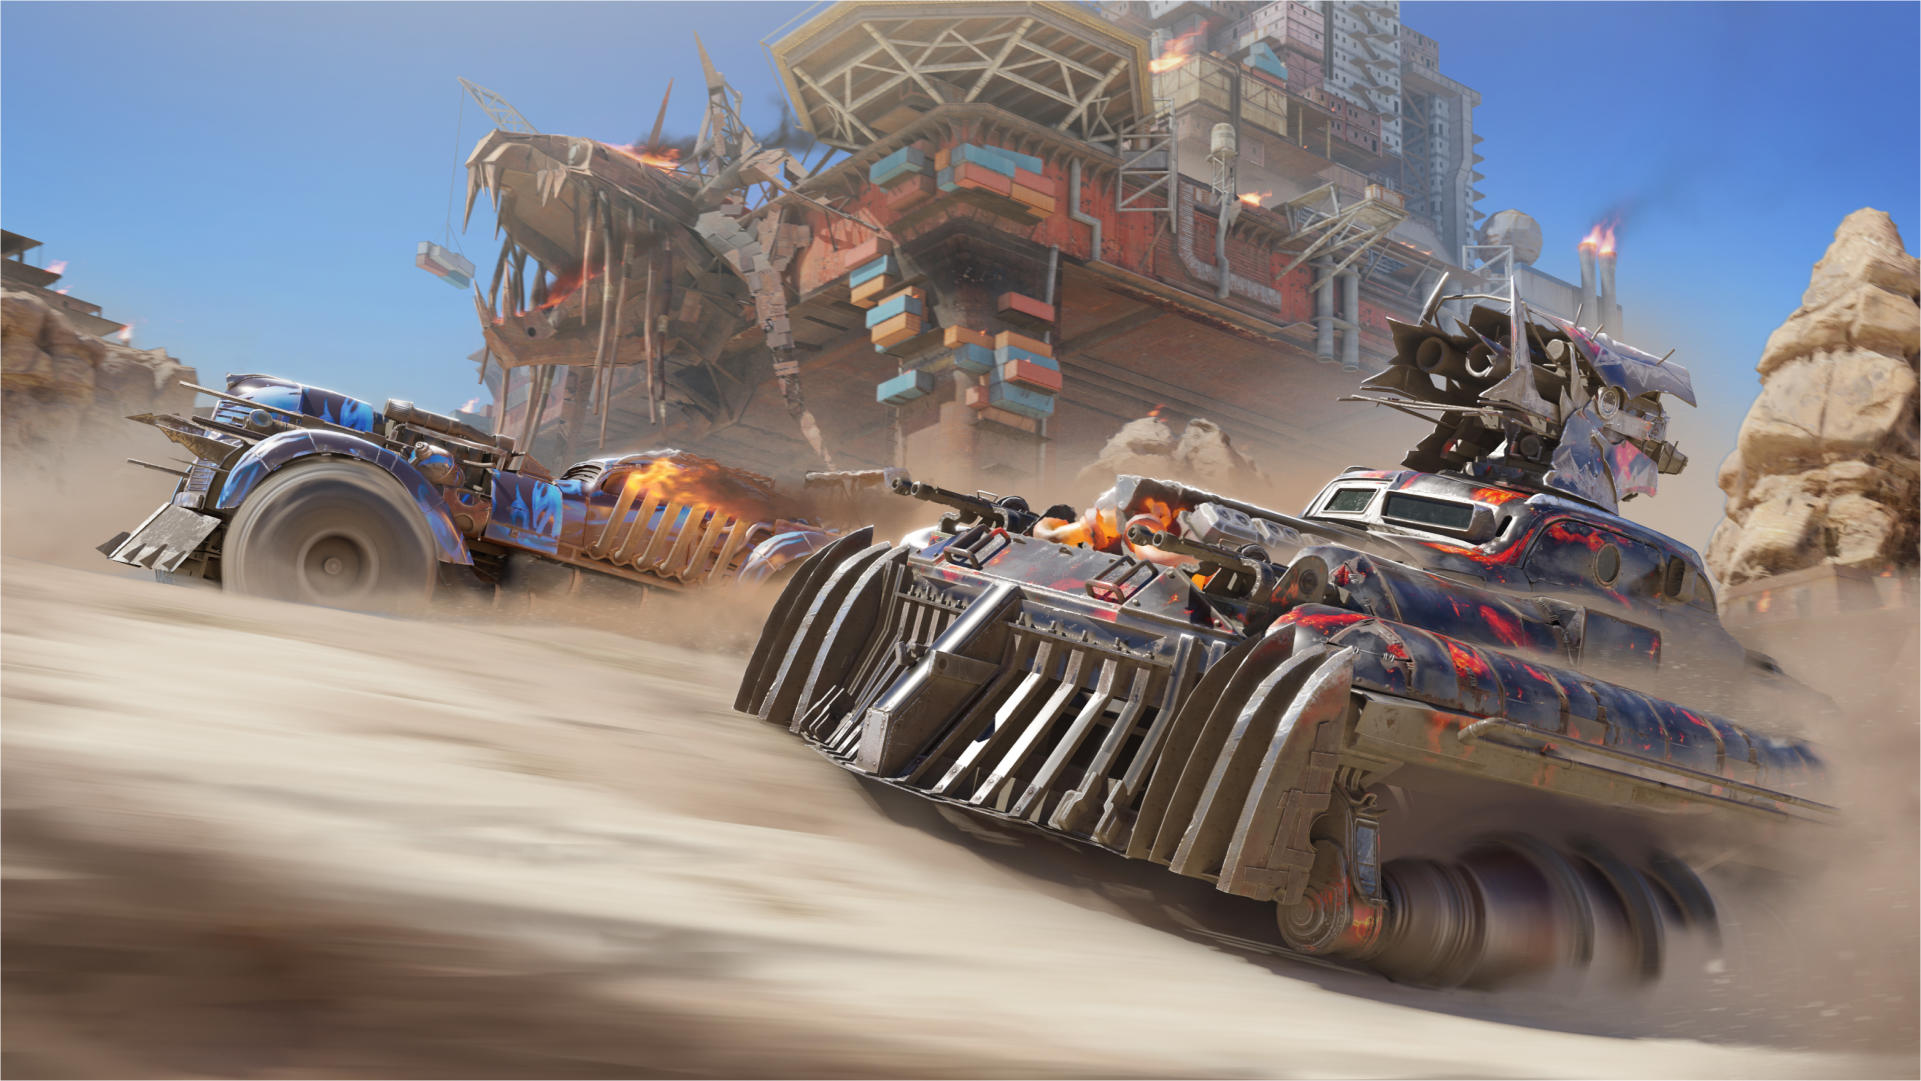 Screenshot 1 of Crossout Mobile - PvP action 1.30.2.80895